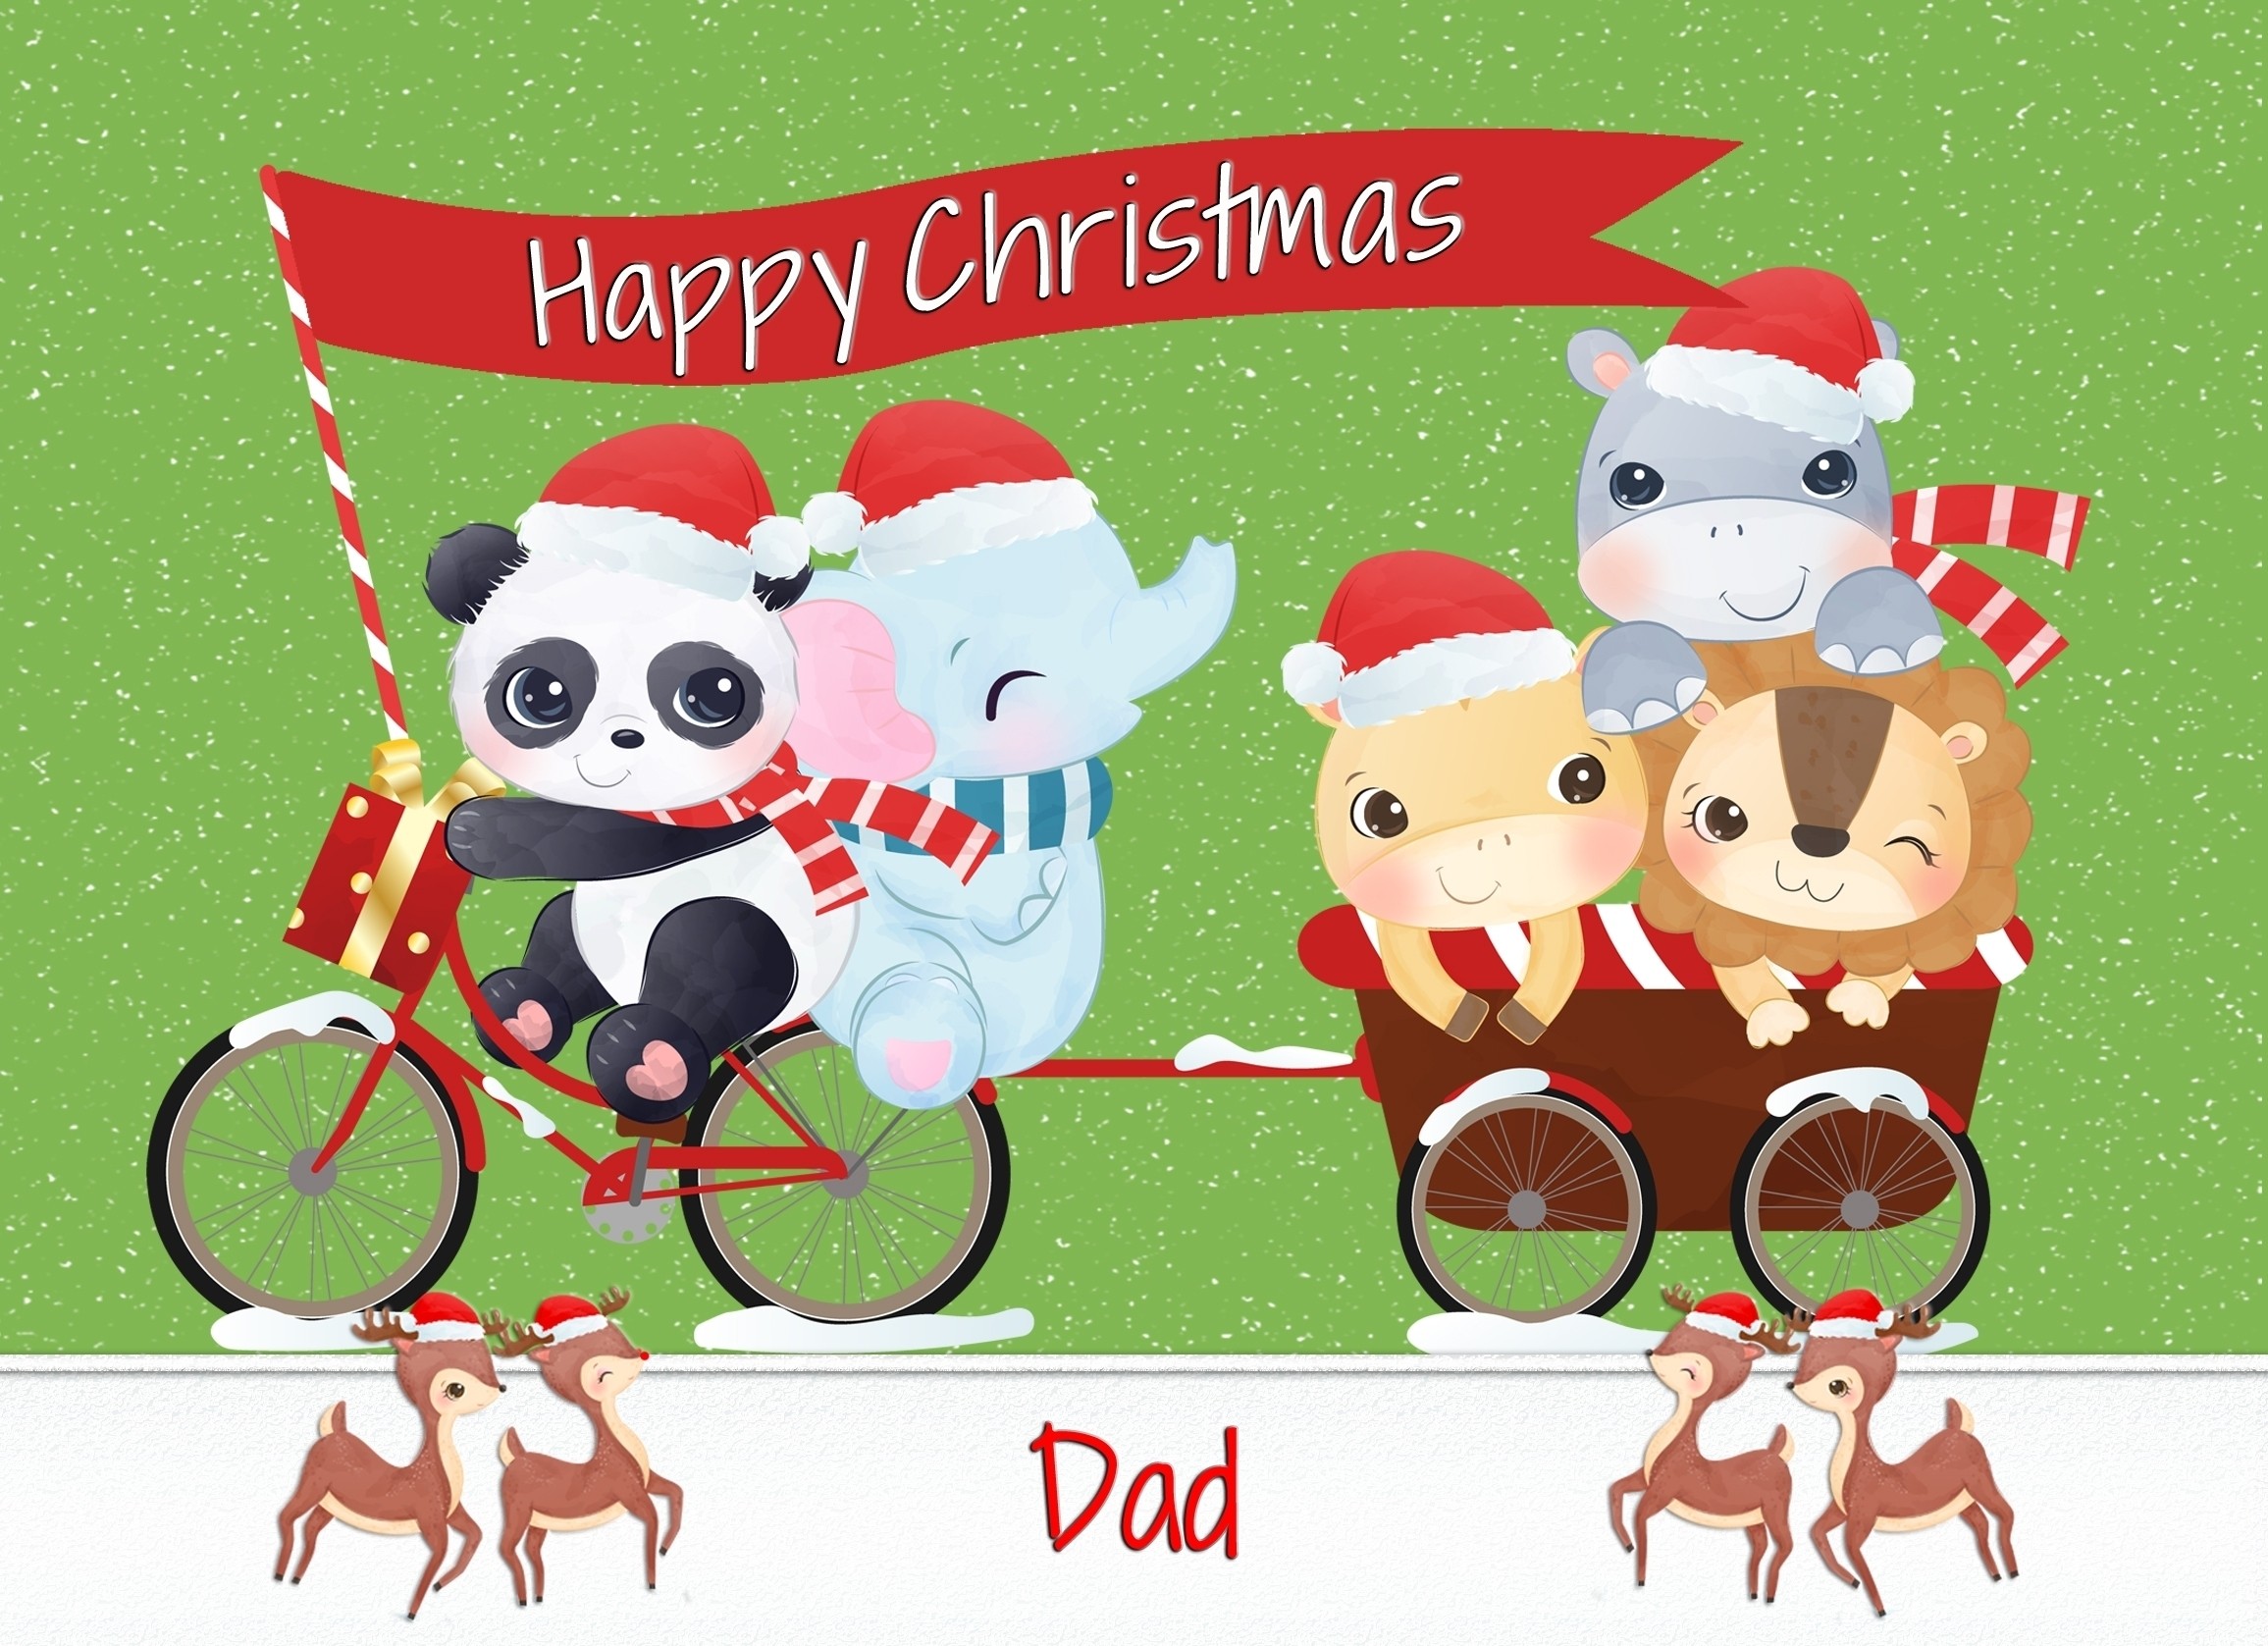 Christmas Card For Dad (Green Animals)